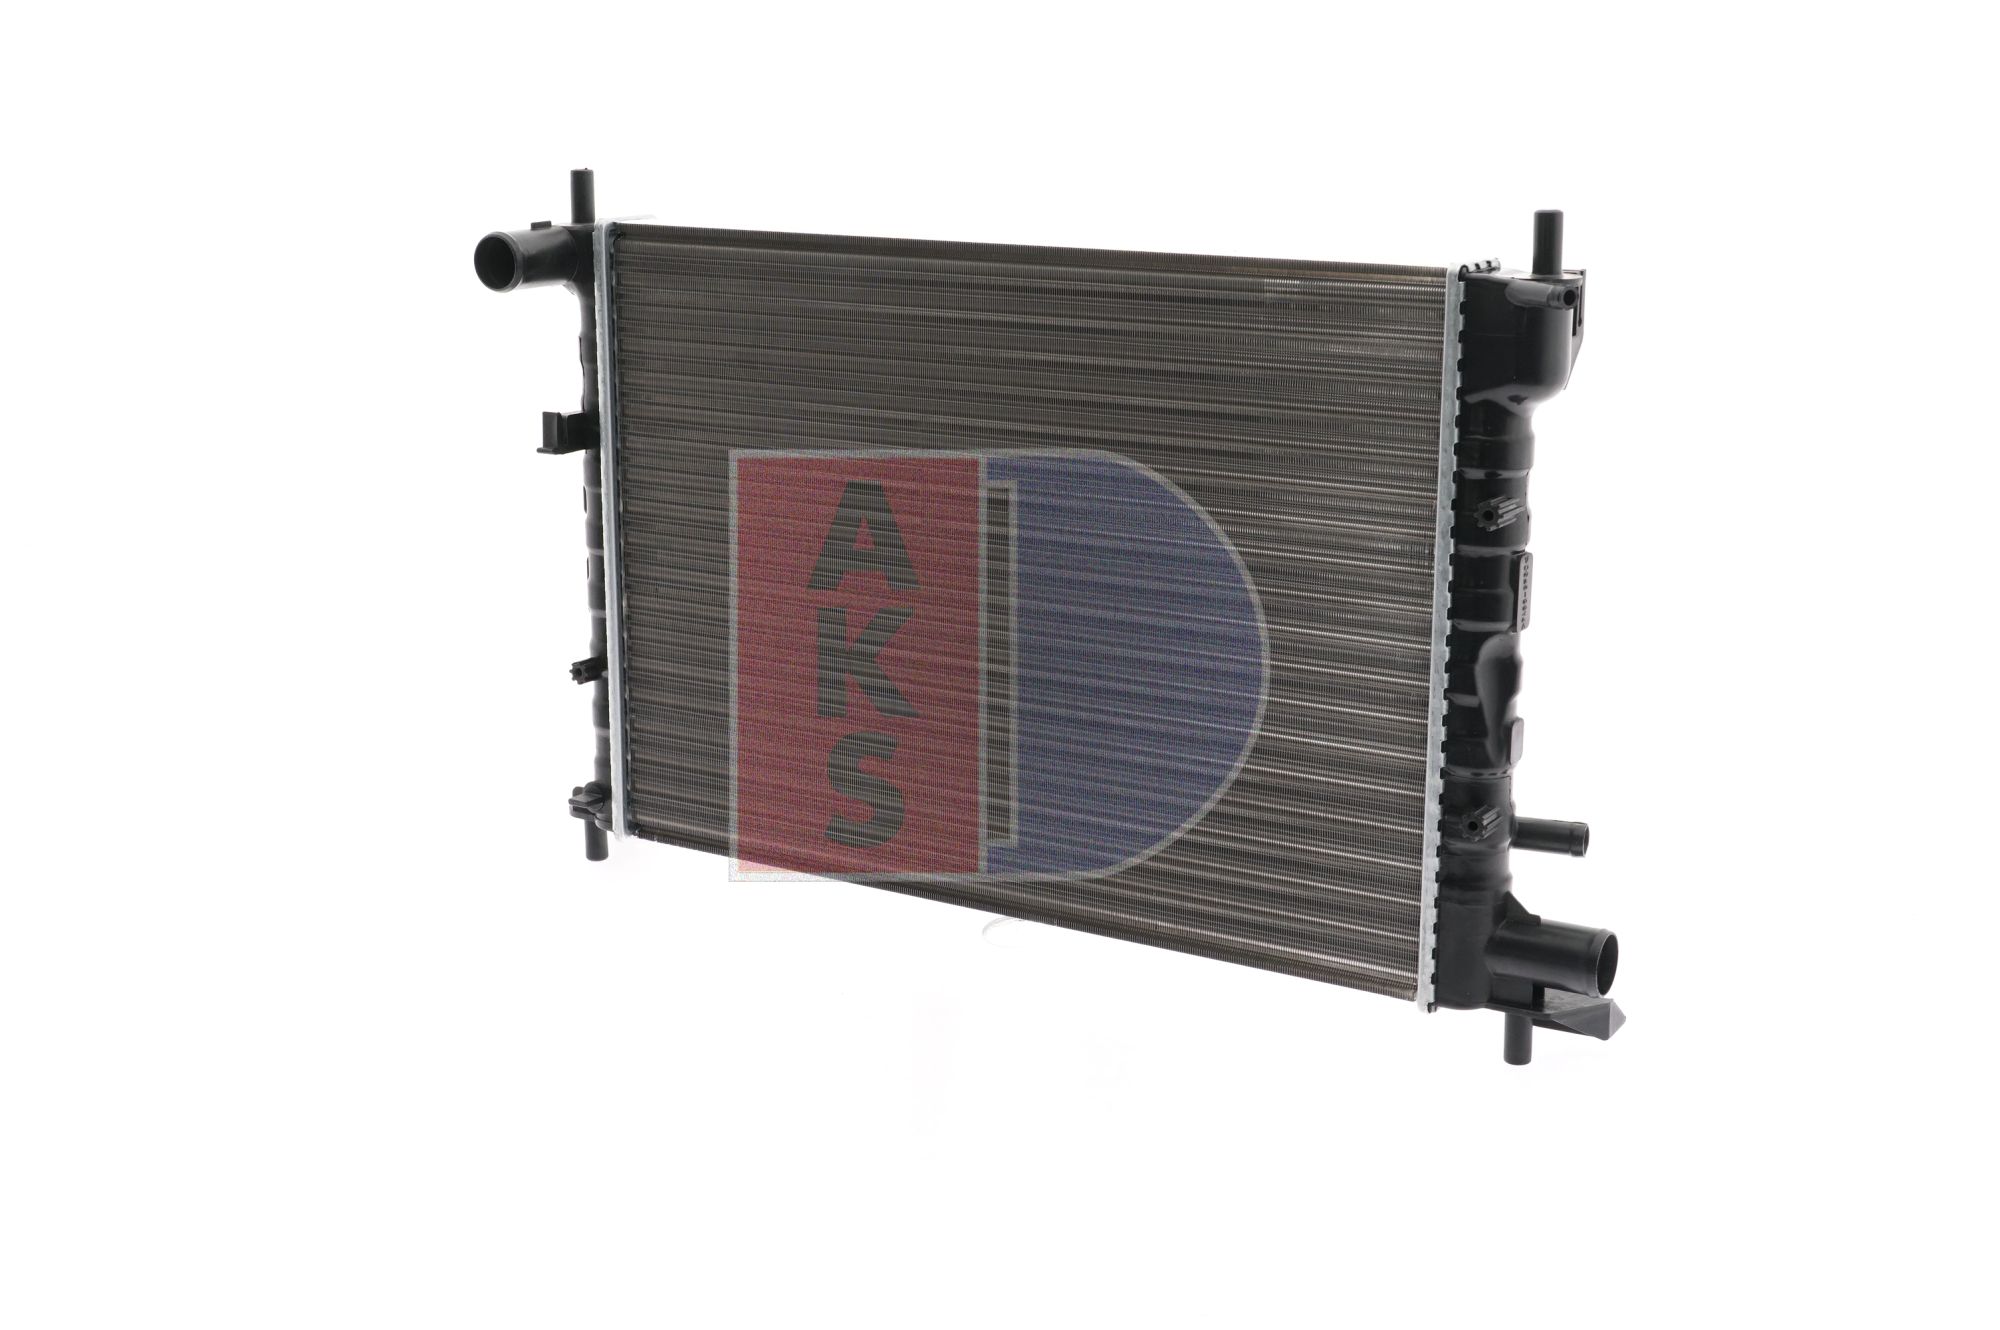 AKS DASIS 091350N Engine radiator 500 x 359 x 30 mm, Mechanically jointed cooling fins